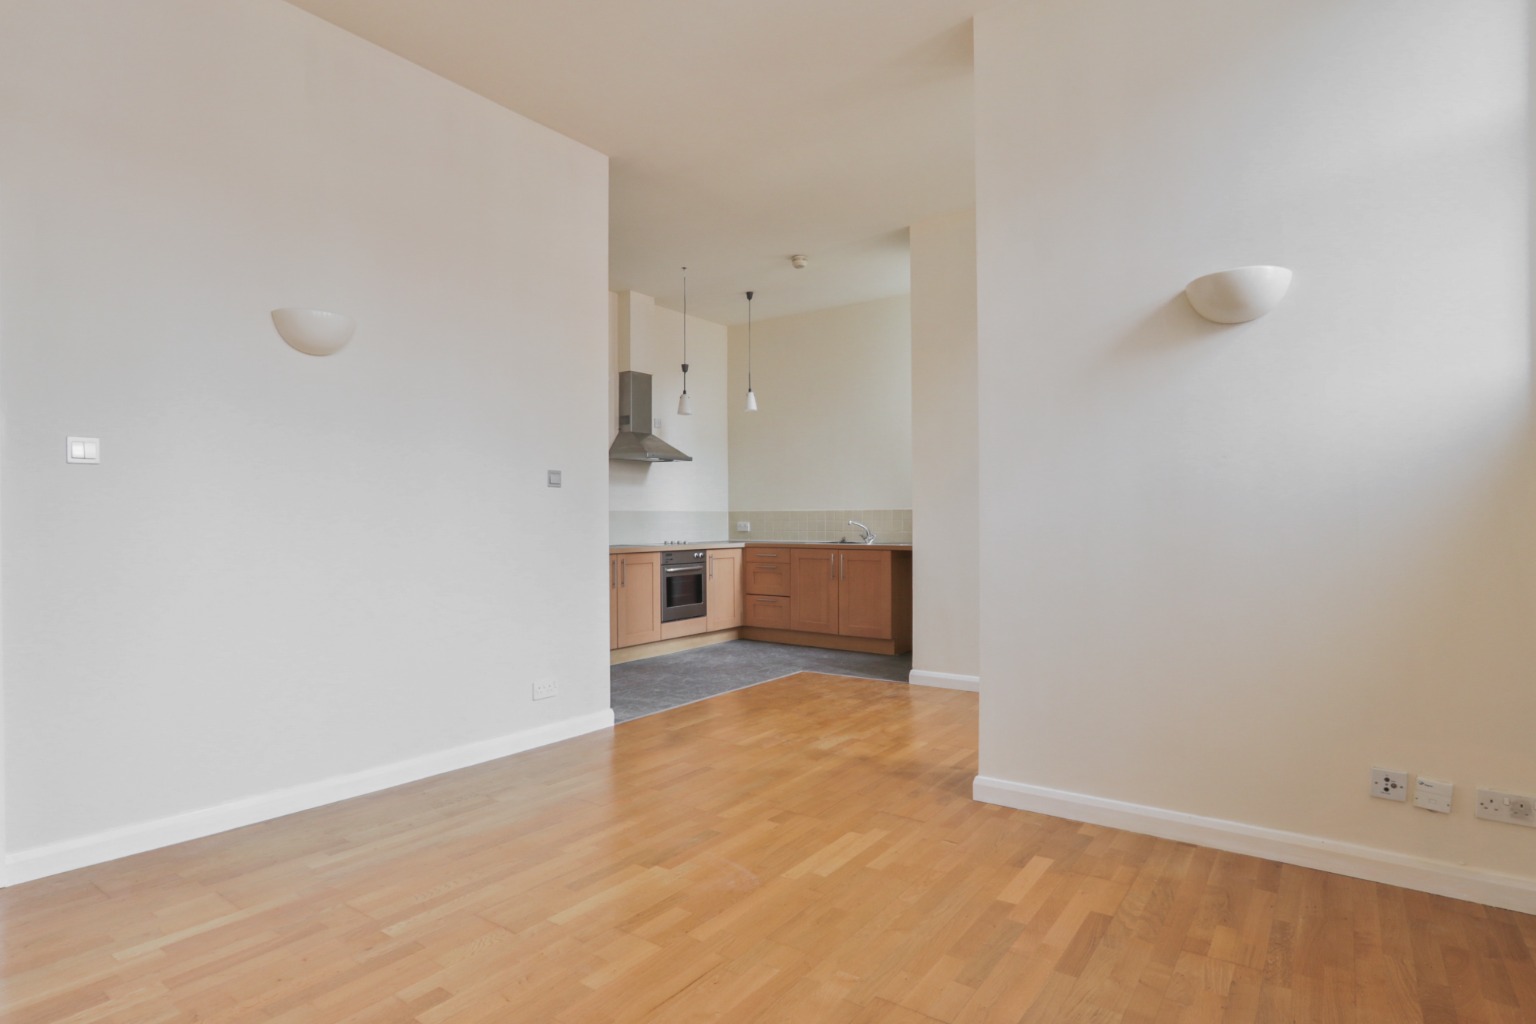 1 bed flat for sale in Lowgate, Hull - Property Image 1